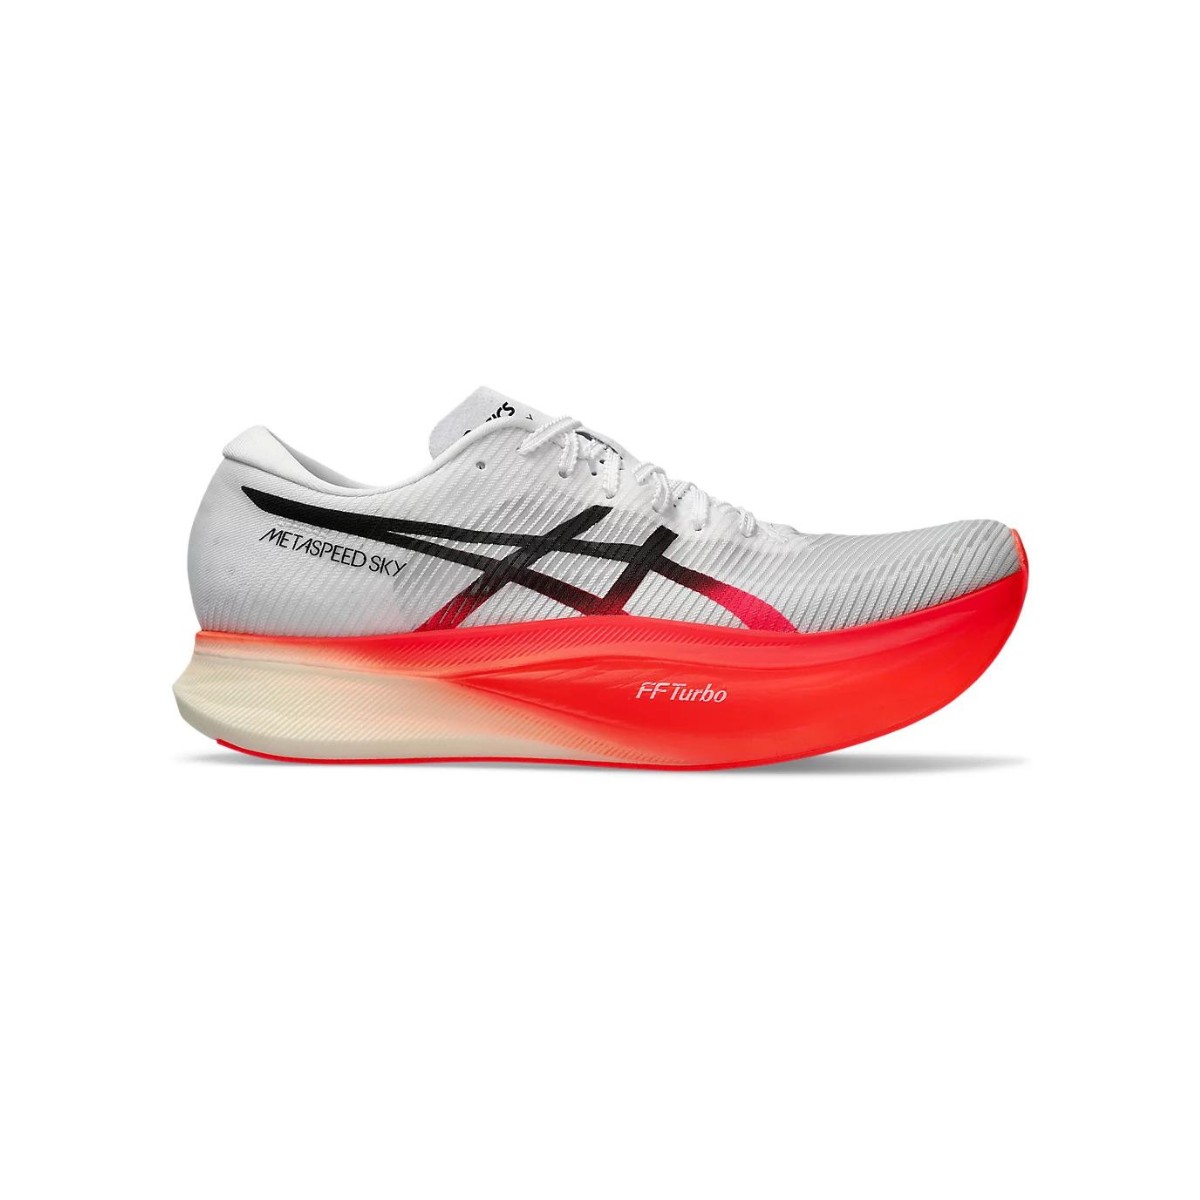 Buy Asics Metaspeed Sky + Unisex Shoes. Available on 365Rider